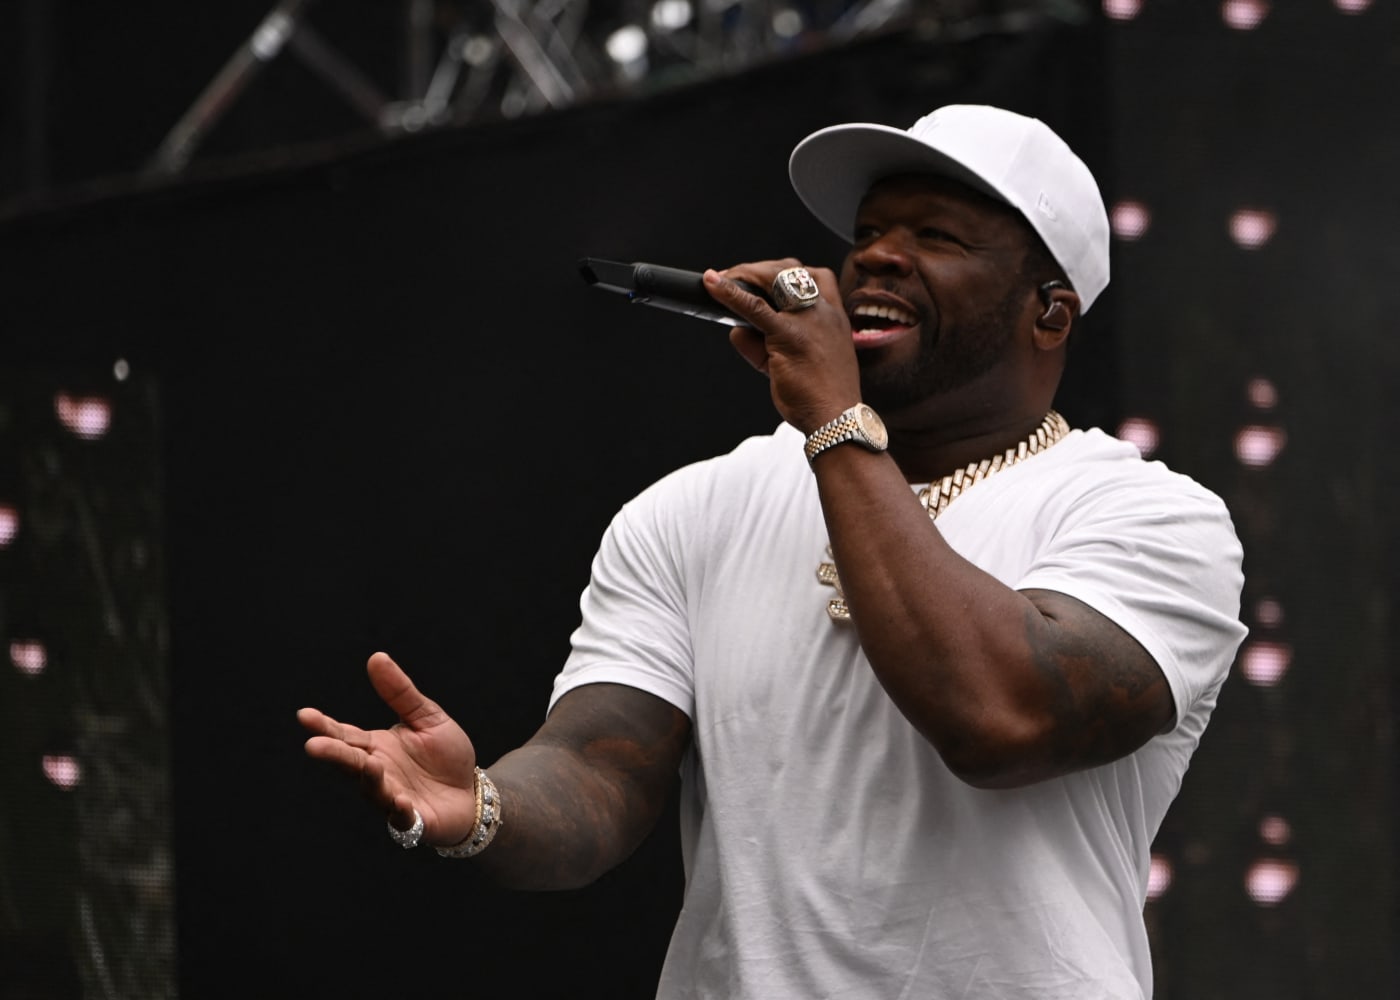 Someone apparently hacked 50 Cent’s accounts to peddle a memecoin and made off with millions